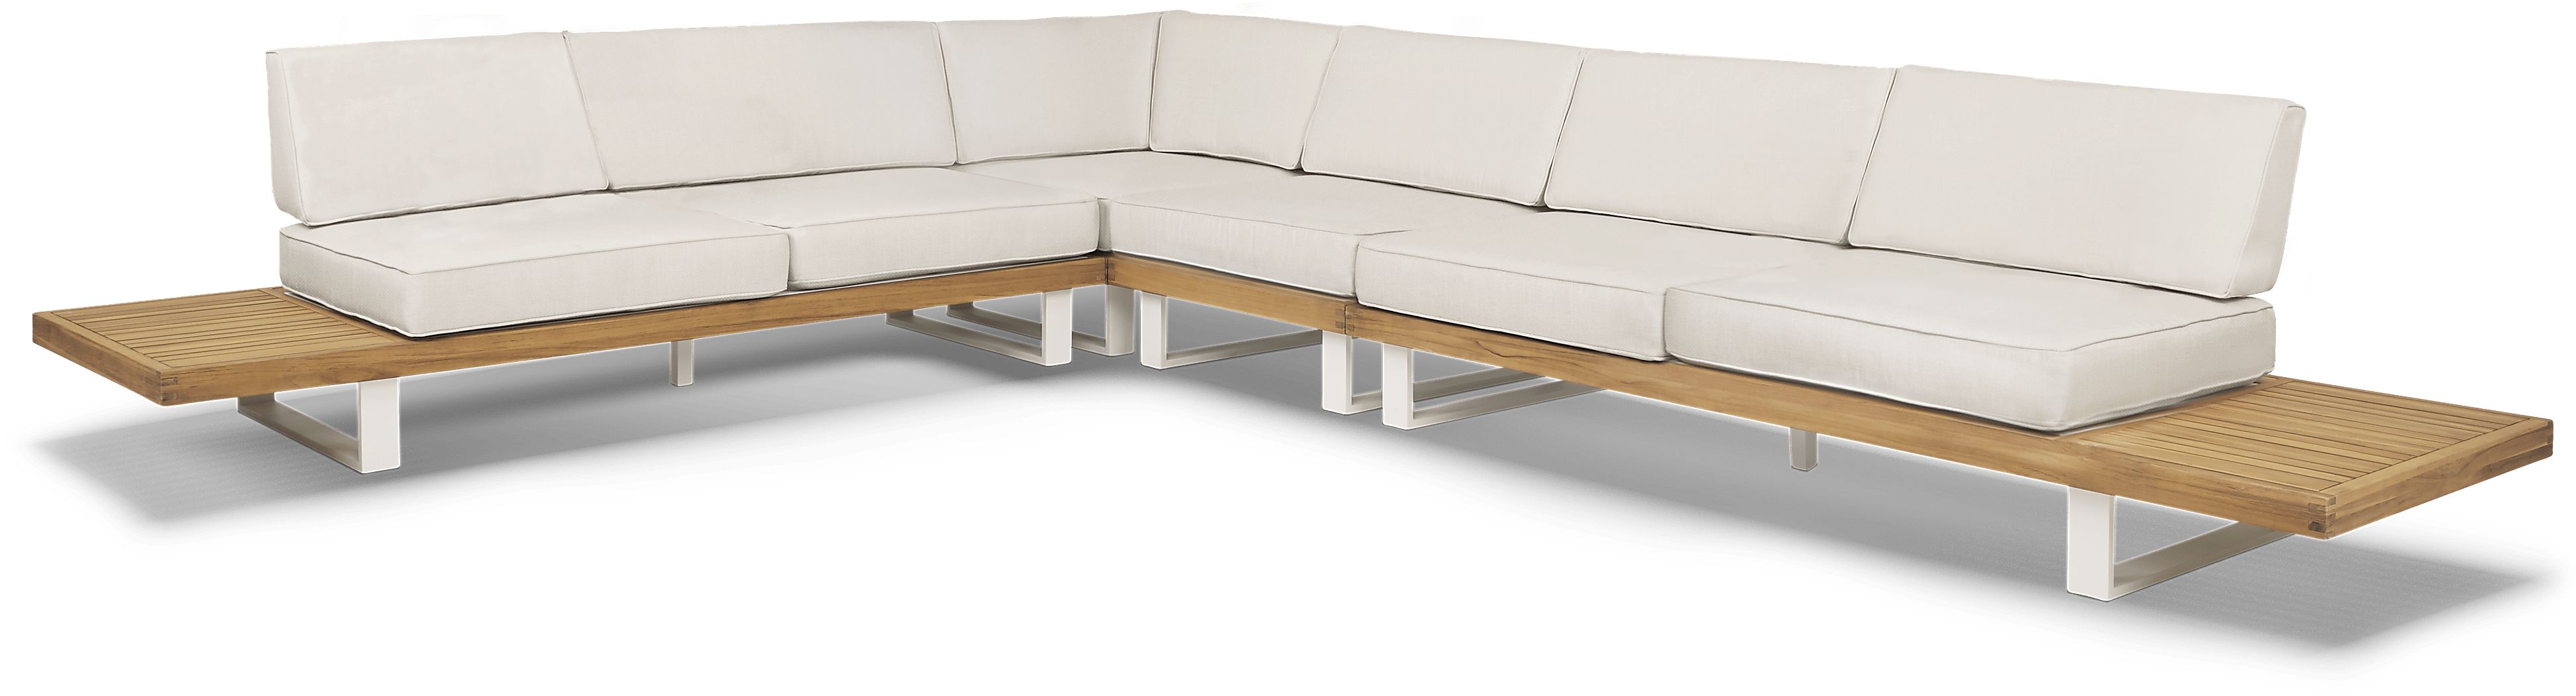 Platform Teak 4 Pc Outdoor Sectional with White Sand Cushions